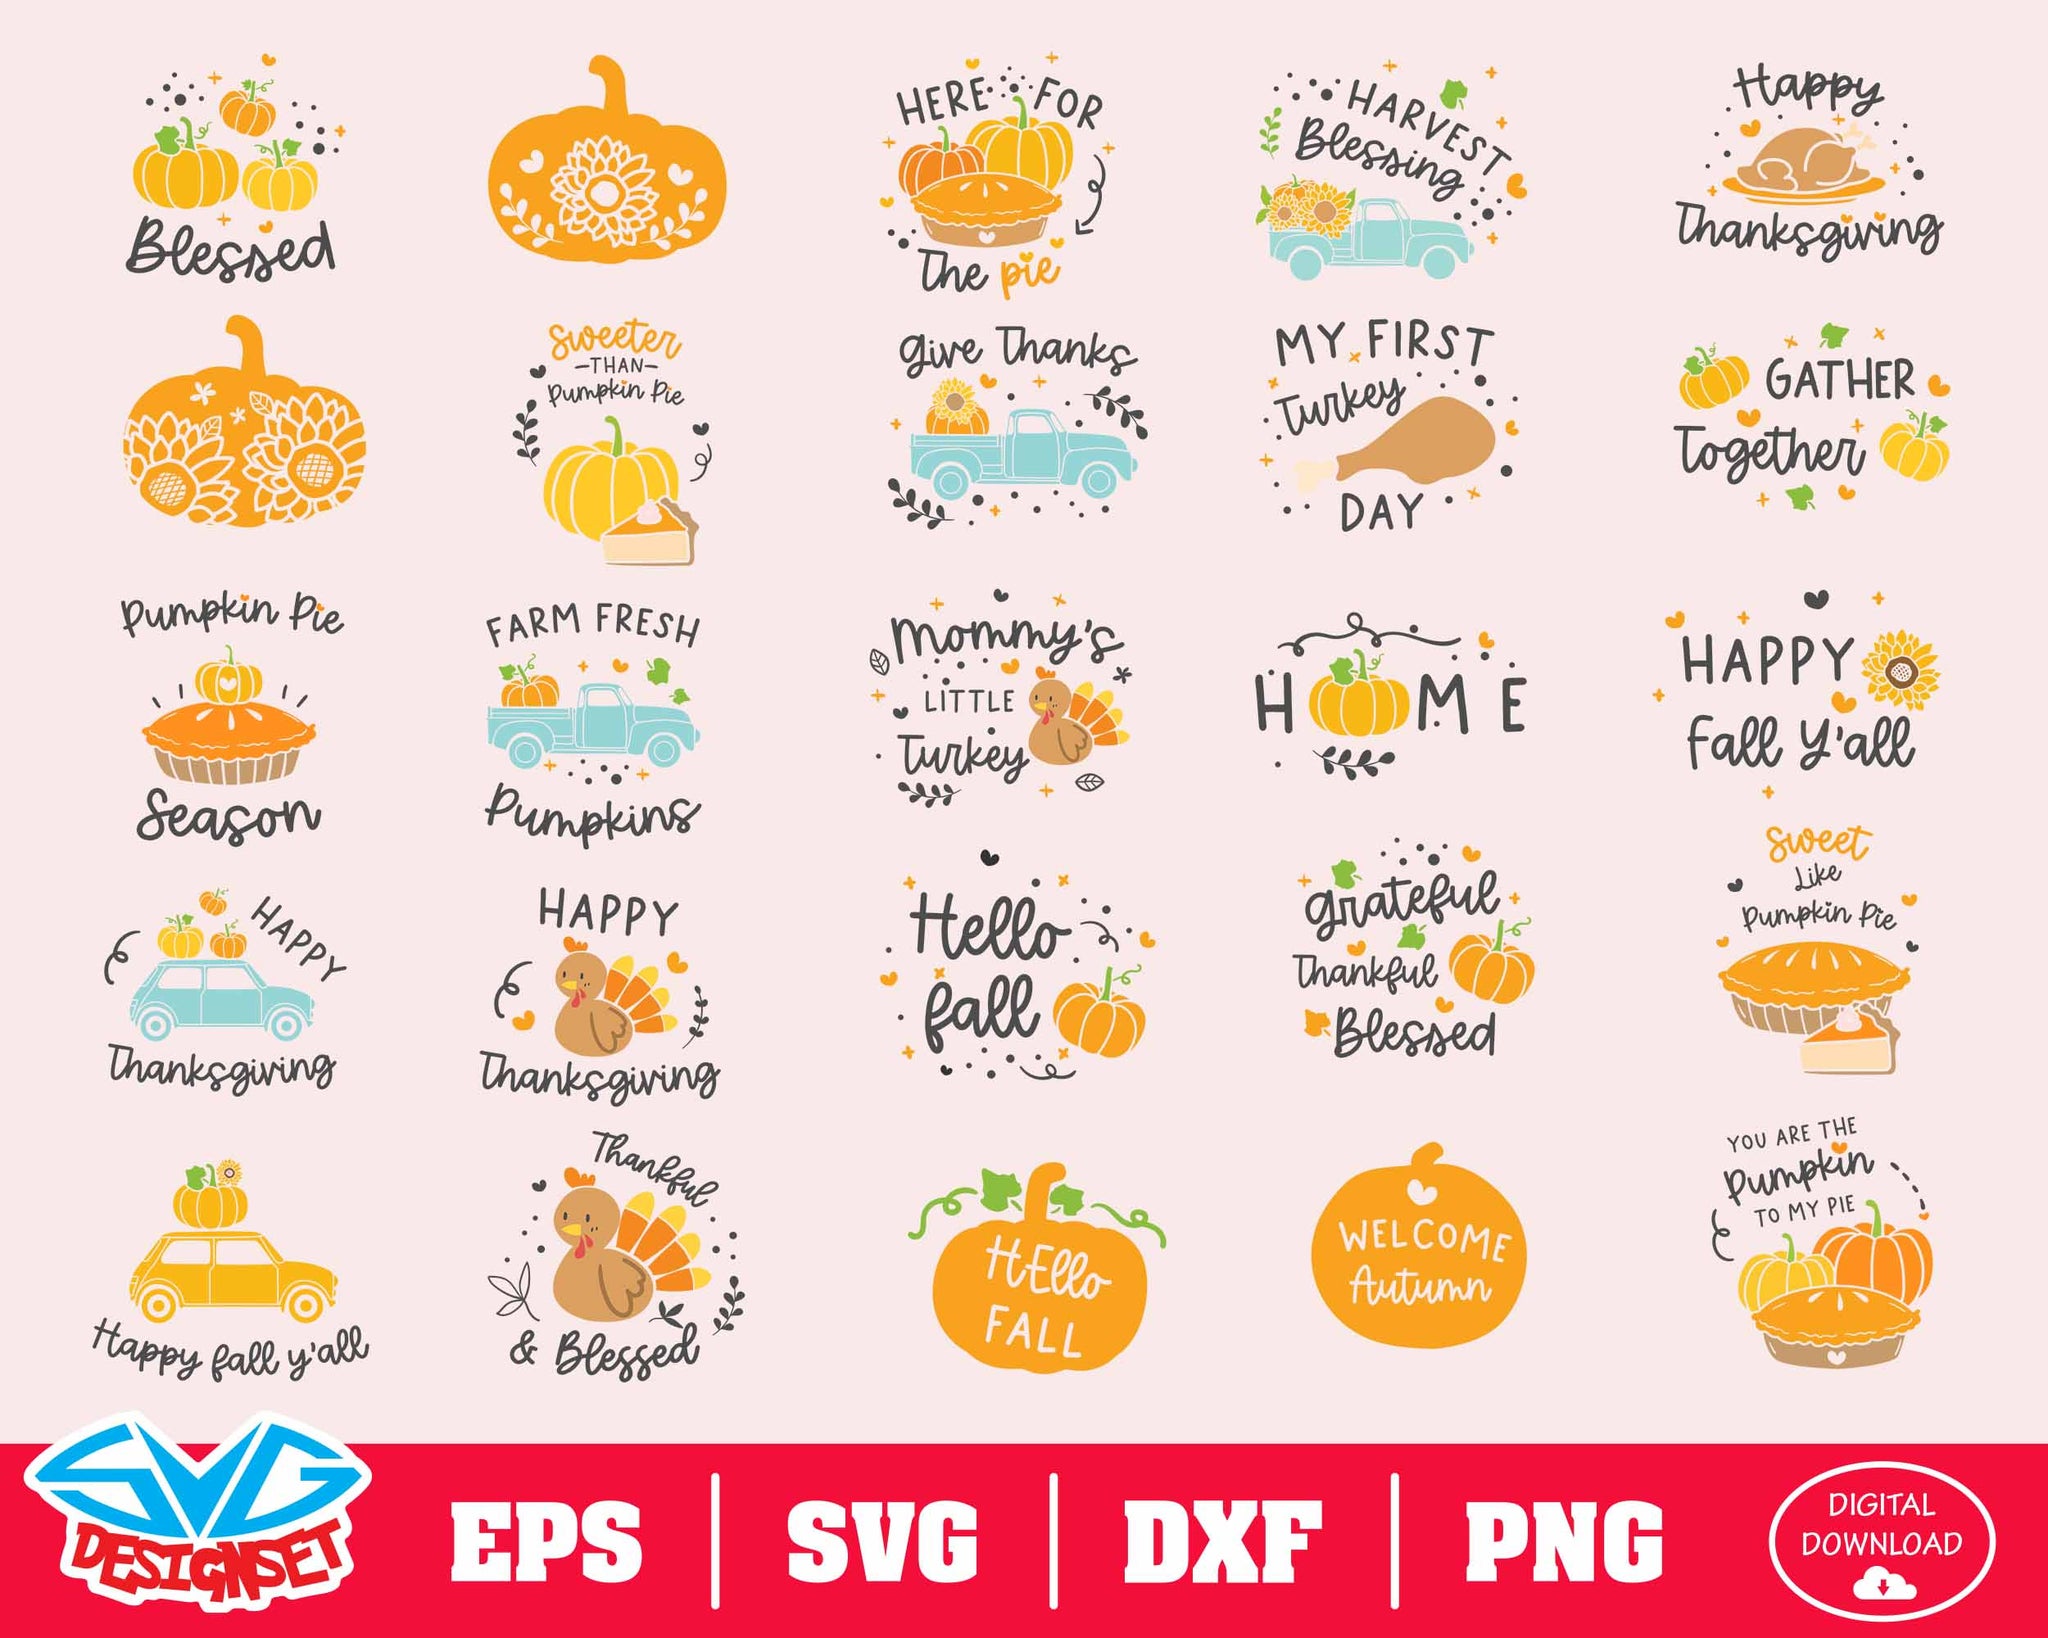 Thanksgiving Svg, Dxf, Eps, Png, Clipart, Silhouette and Cutfiles #2 - SVGDesignSets